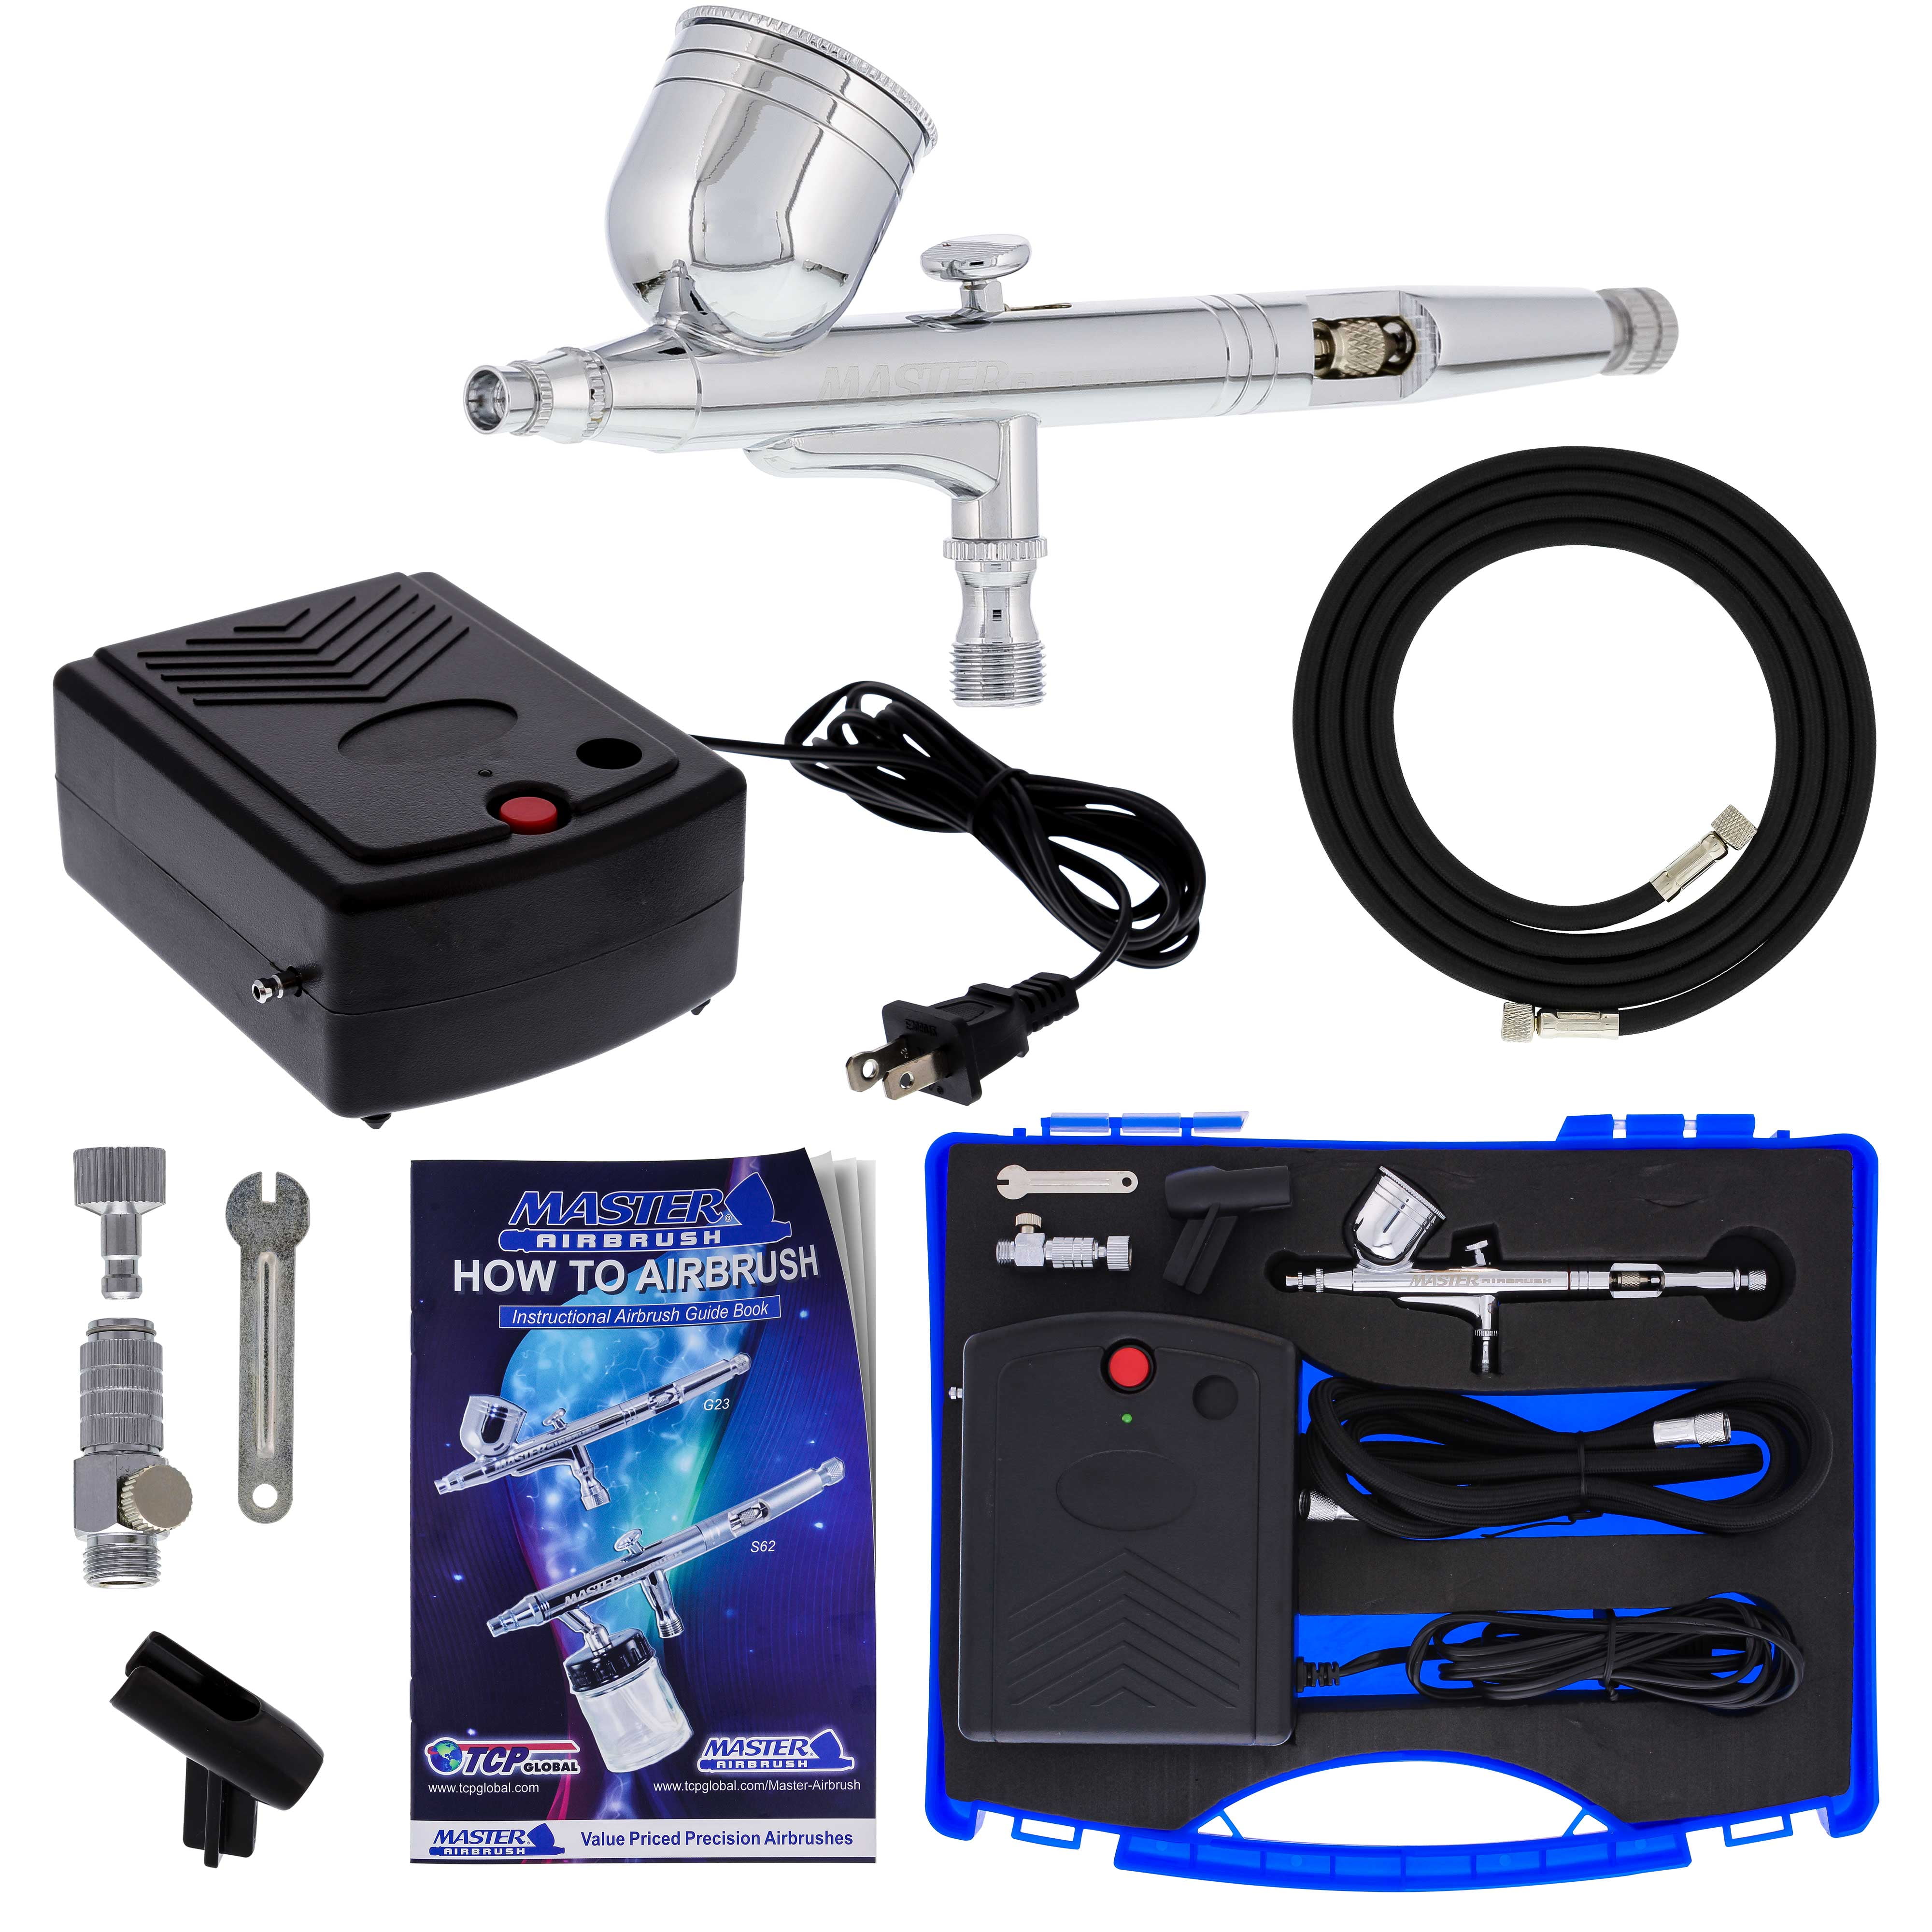 OPHIR 3 Tips Pro Gravity Dual Action Airbrush Kit with Cooling Fan